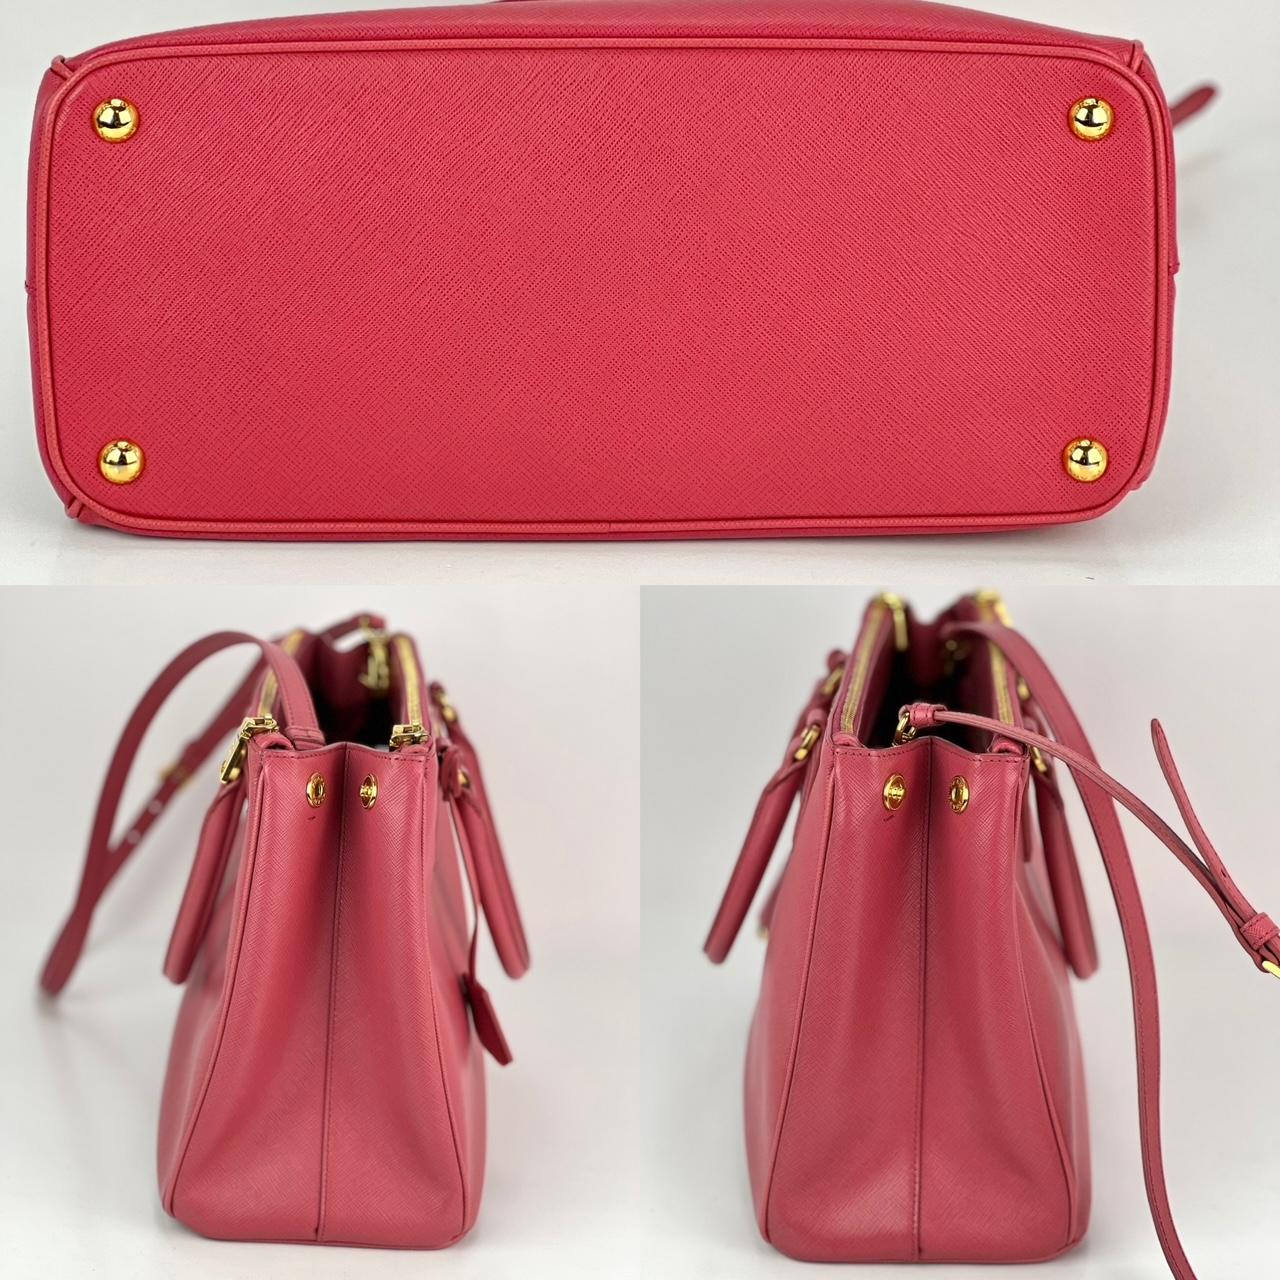 Pre-Owned  100% Authentic
Prada Large Galleria Saffiano Leather Dark Pink Shoulder Bag
RATING: A/B...Very Good, well maintained, 
shows minor signs of wear
MATERIAL: 
STRAP: Prada removable adjustable strap 36'' to 40''
DROP: 17'' to 19''